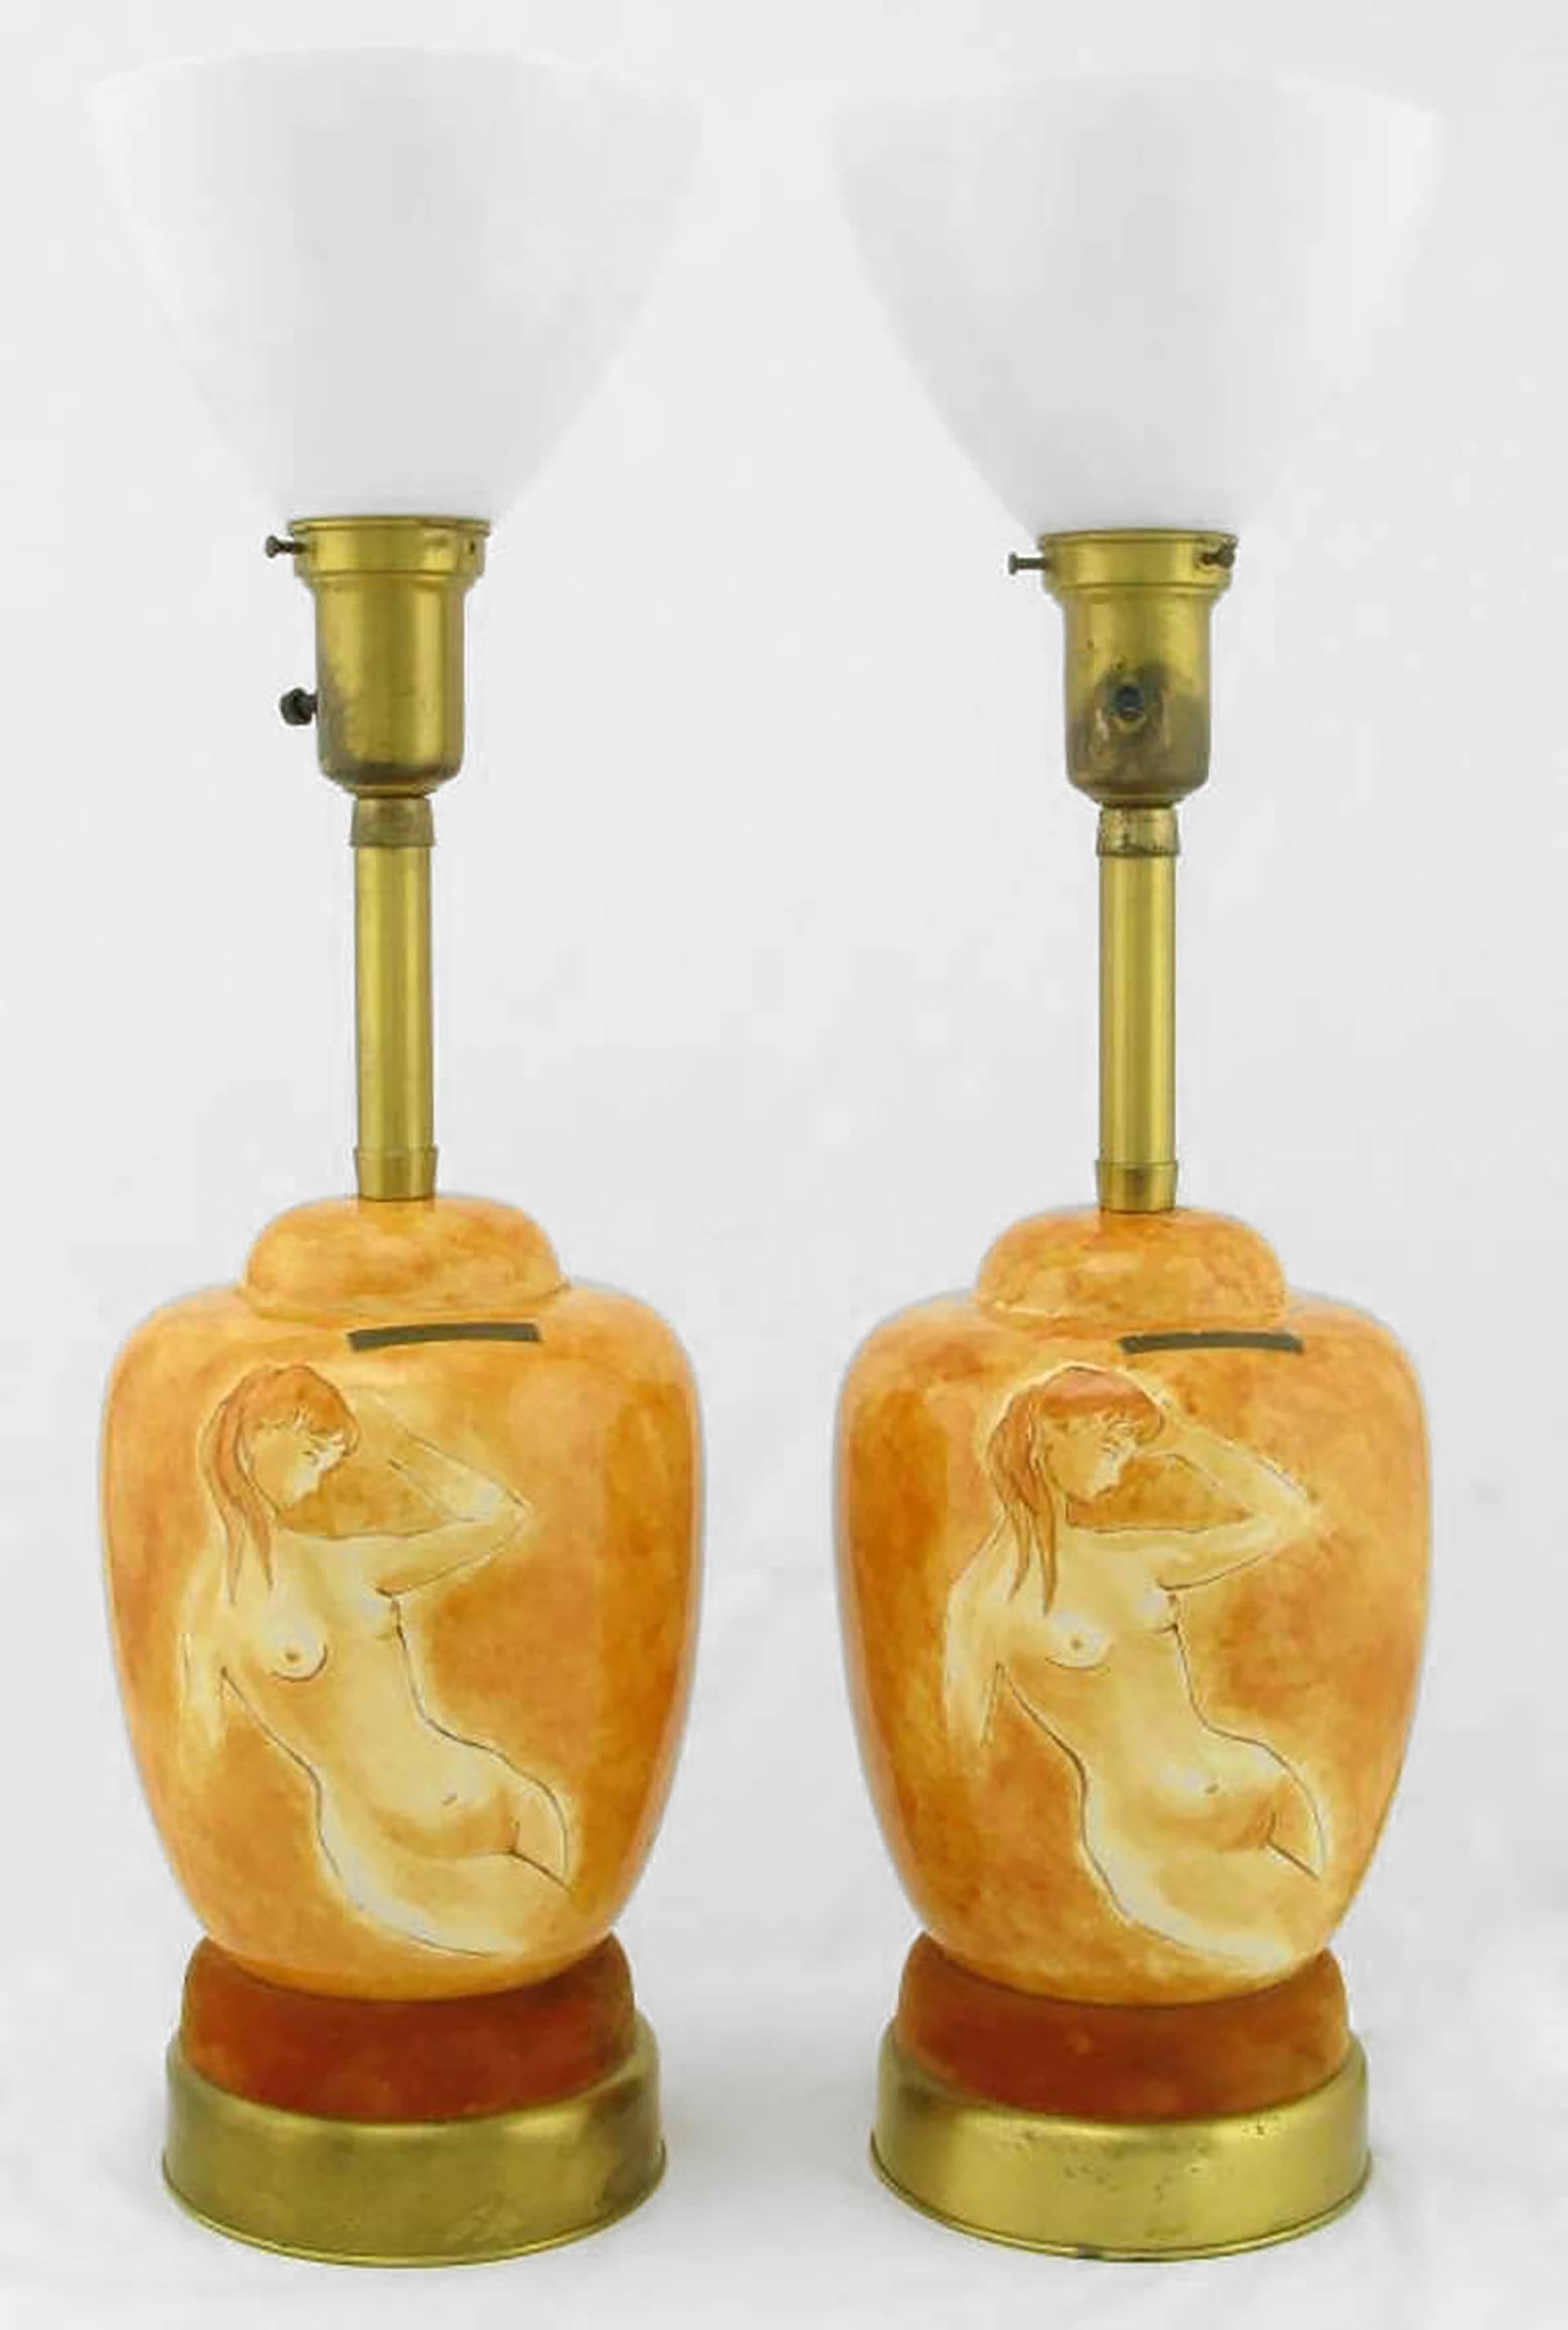 Pair of Sèvres Porcelain hand-painted table lamps with two part brass and umber velvet base. The hand-painted and glazed bodies of the table lamps are a female nude on a heathered cinnamon background. Comes with original milk glass diffusers. Sold